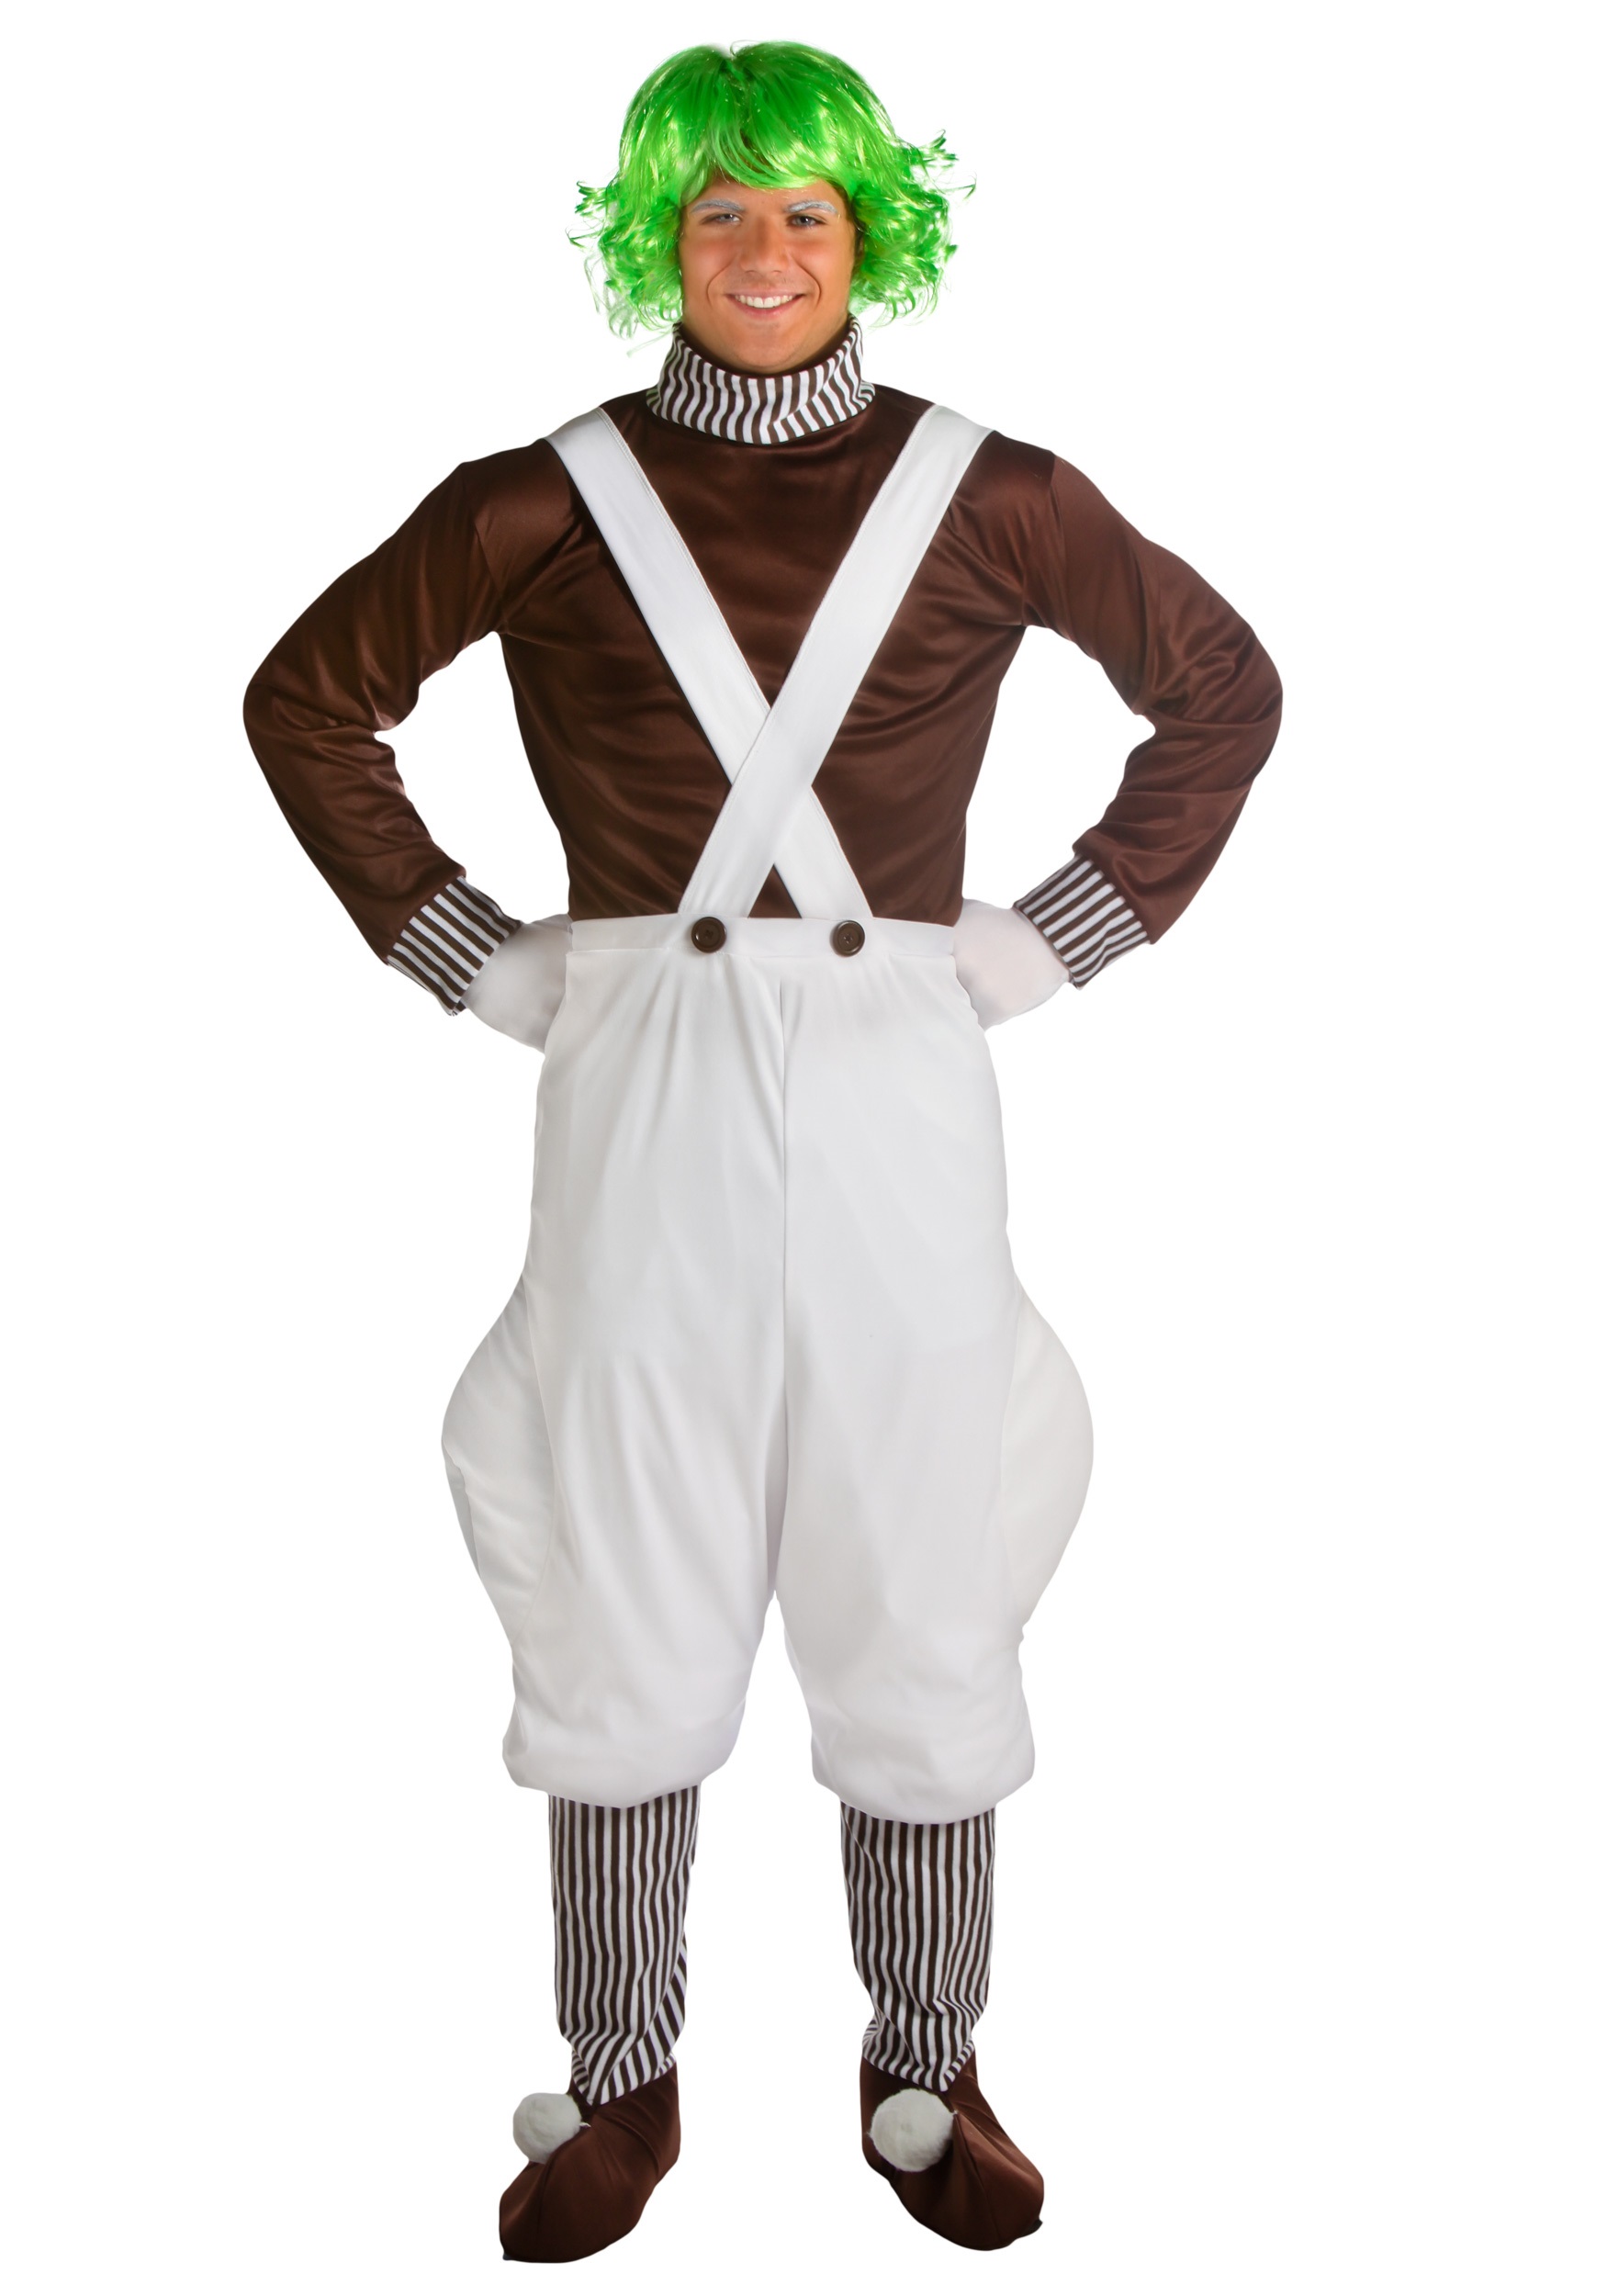 Photos - Fancy Dress WORKER FUN Costumes Chocolate Factory  Plus Size  Costume Brown& 